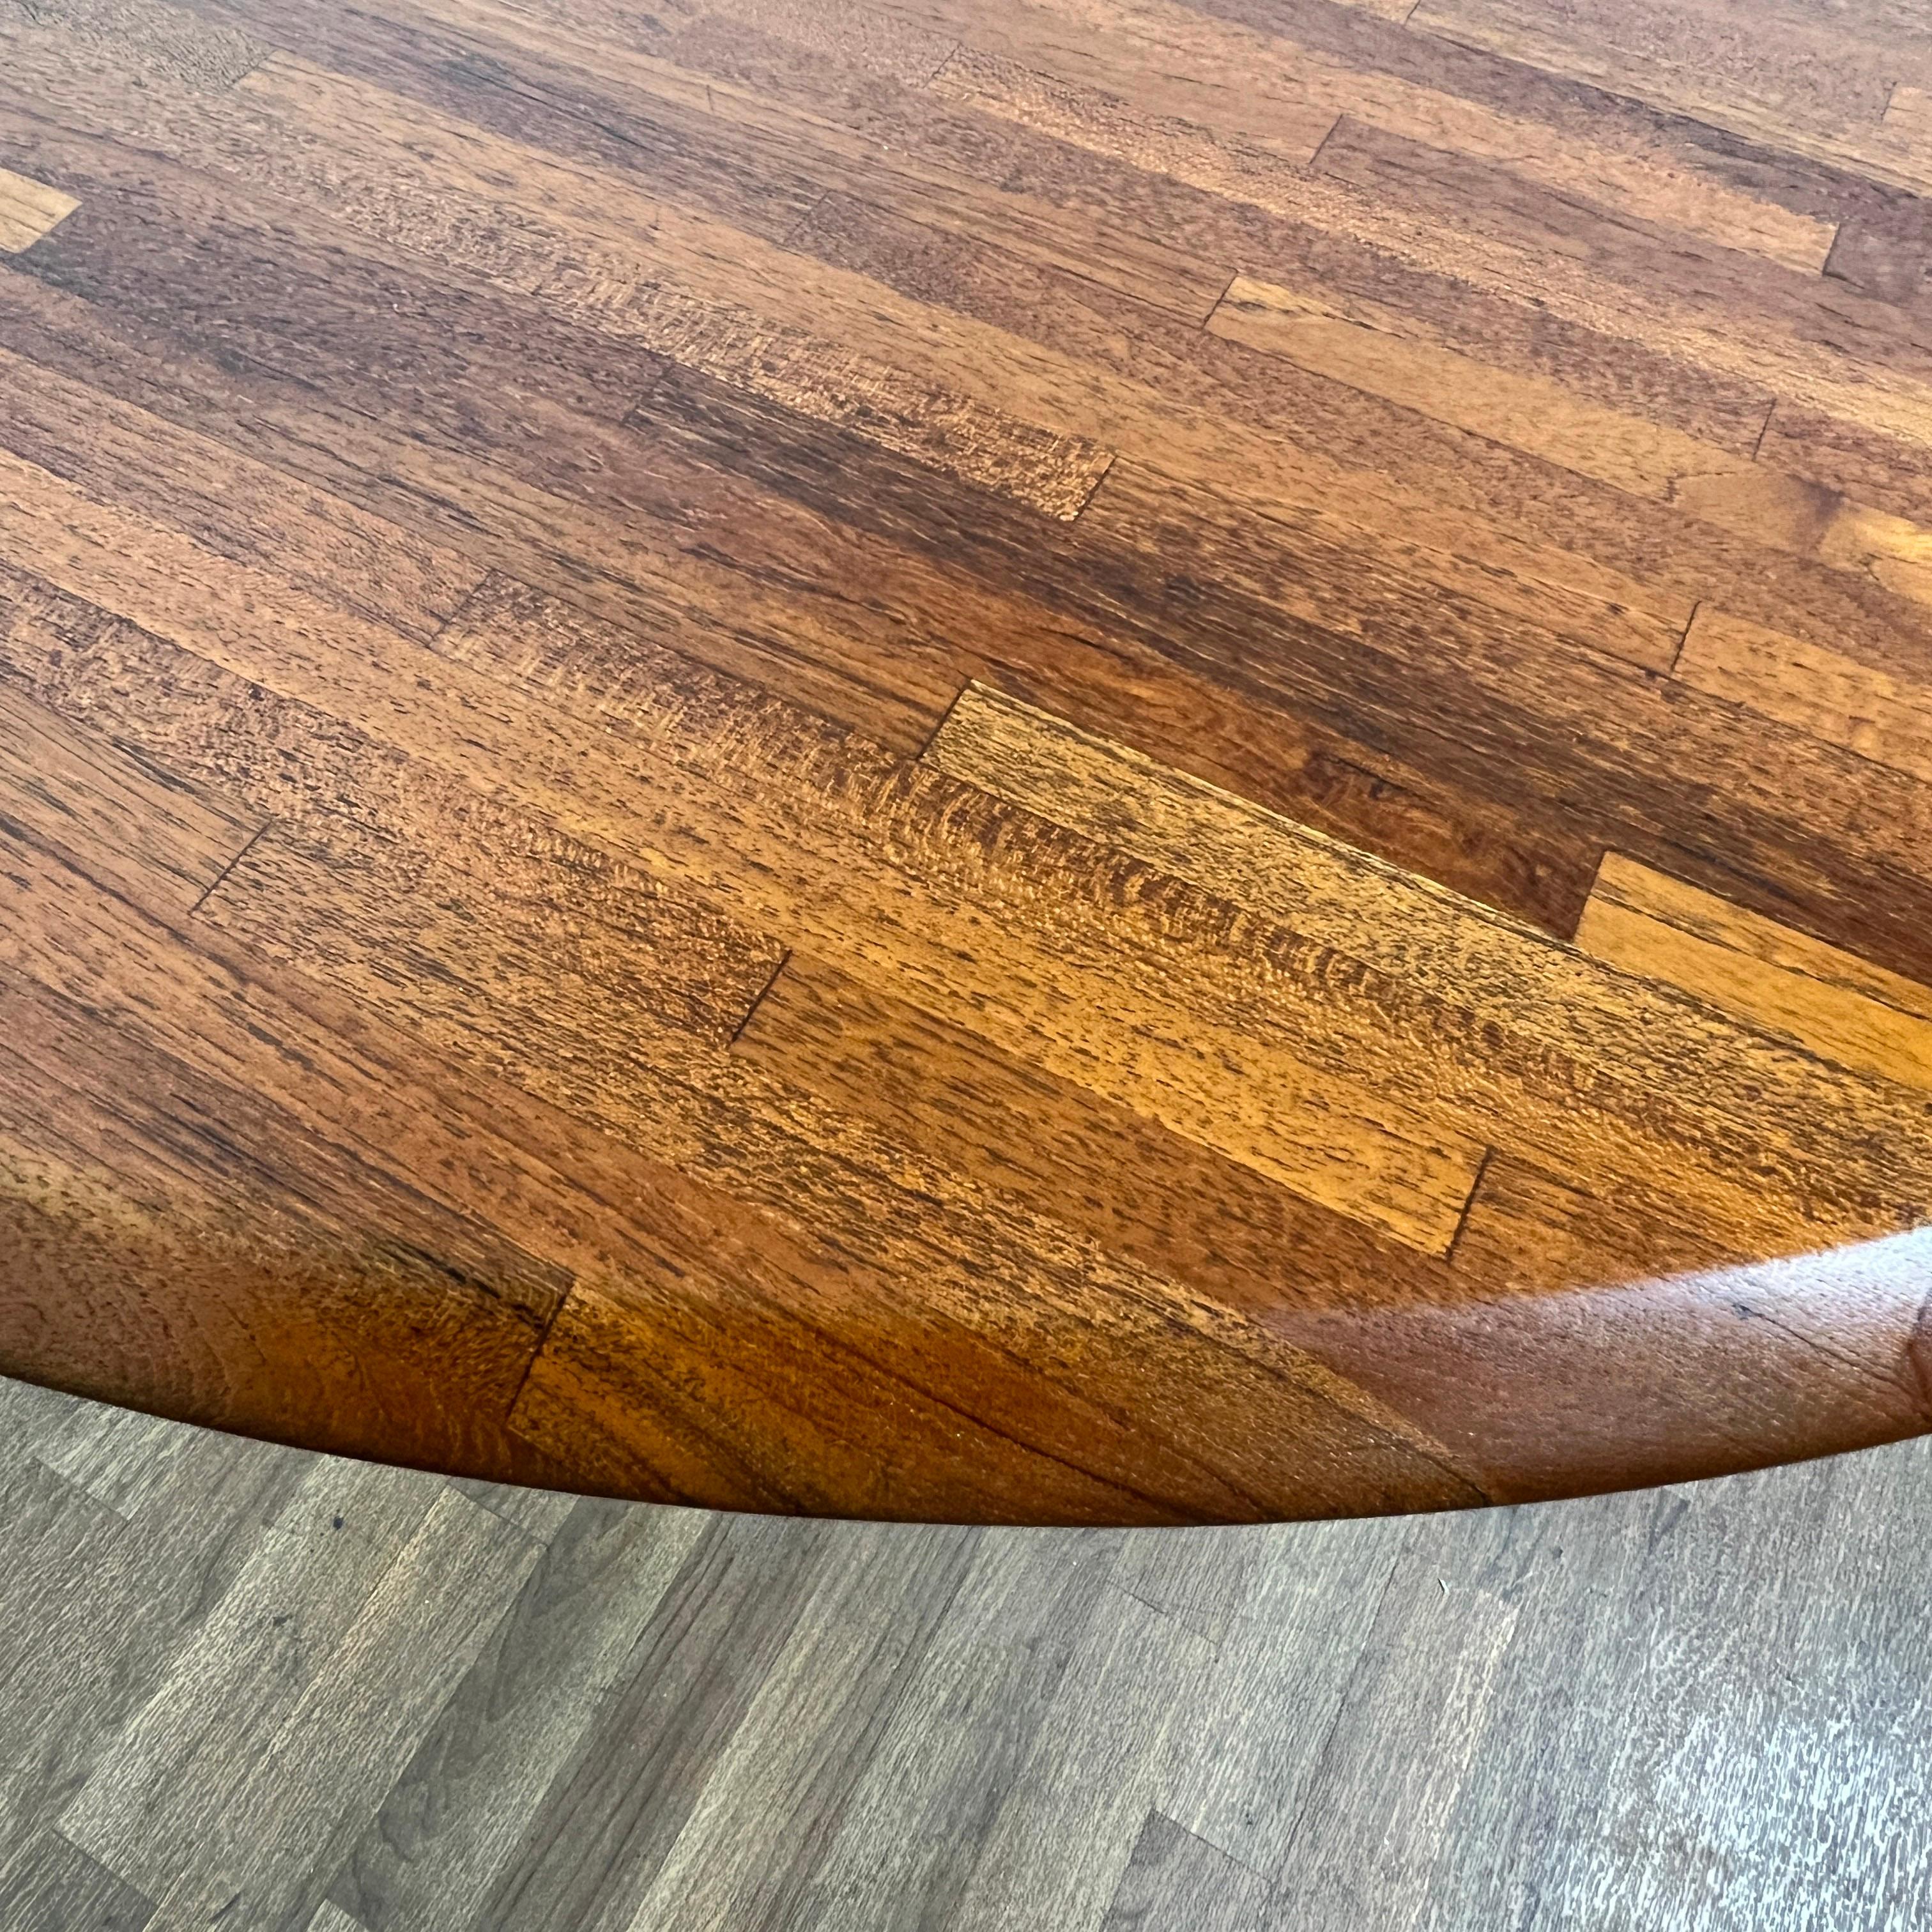 Danish Modern Staved Teak Dining Table Circa 1970s In Good Condition For Sale In Peabody, MA